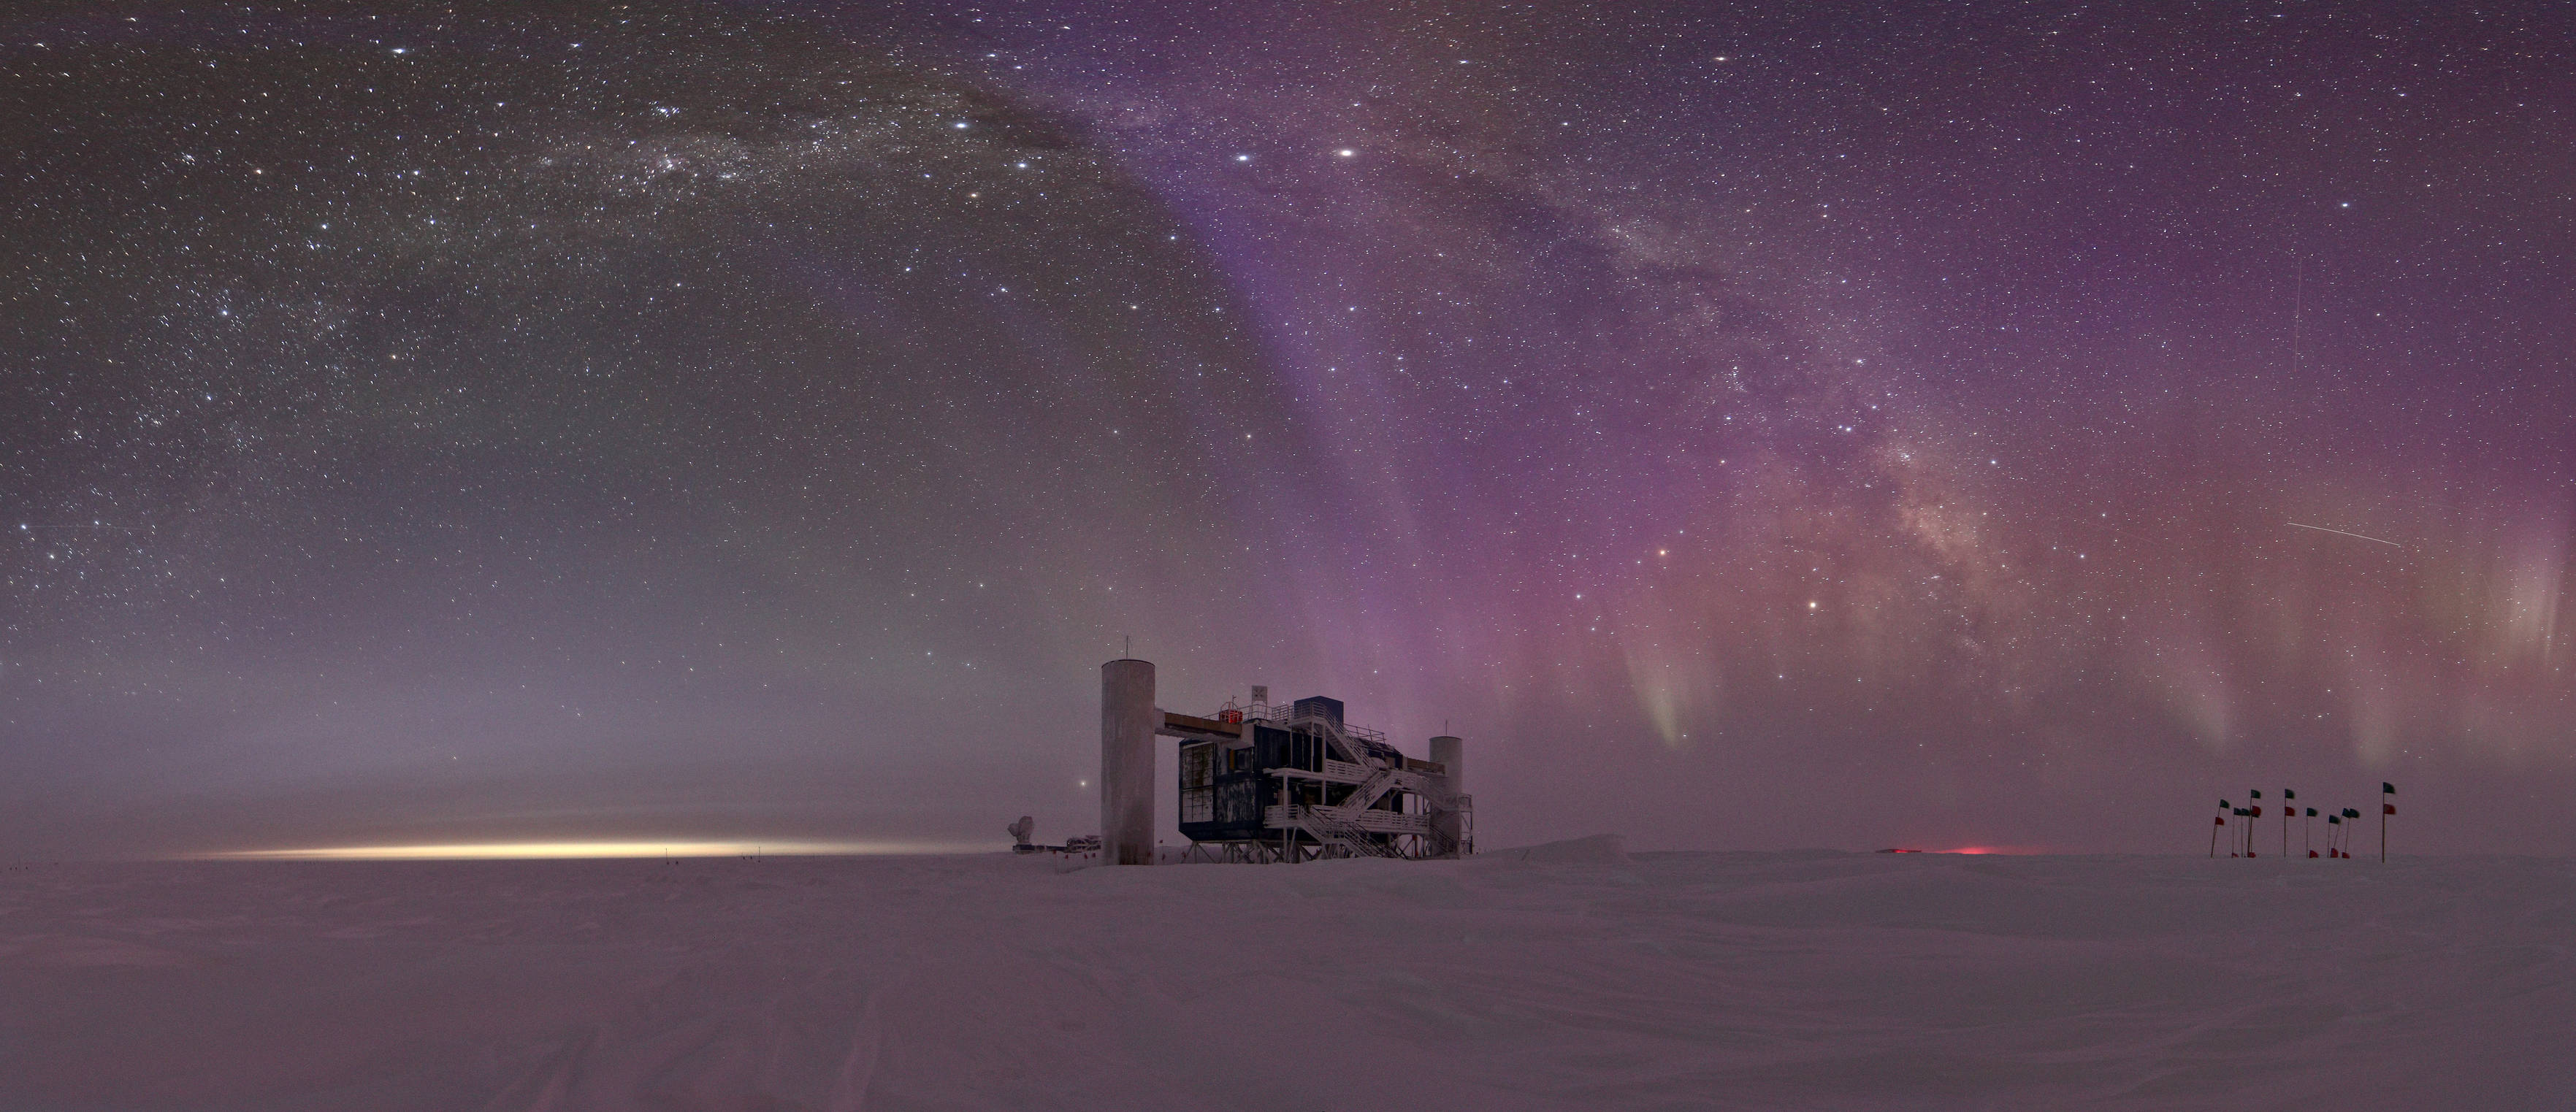 A wide angle shot of the auroras and the Milky Way above the IceCube Laboratory